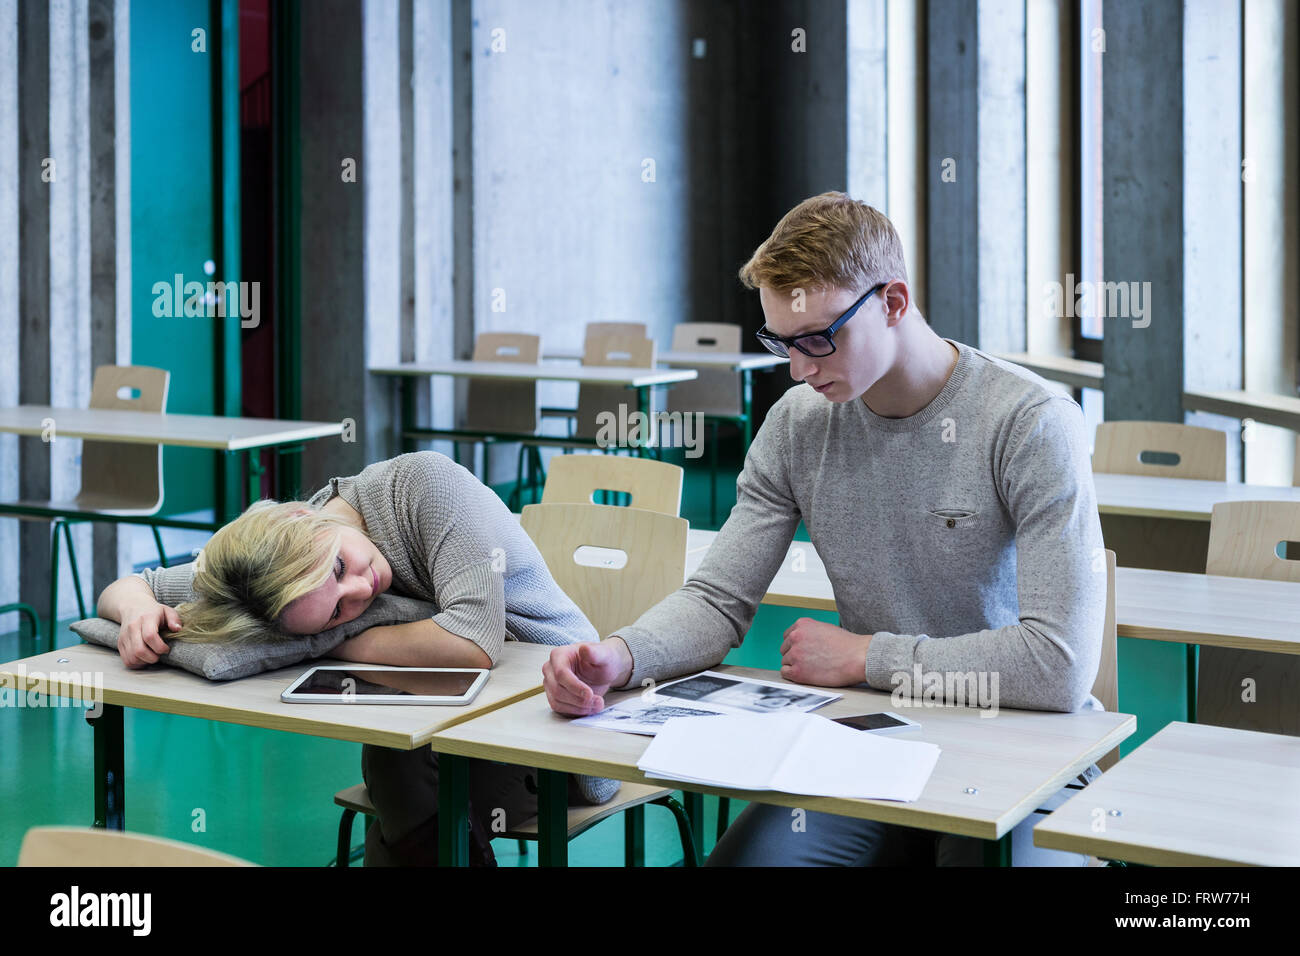 Two students in classroom with woman sleeping on desk Stock Photo